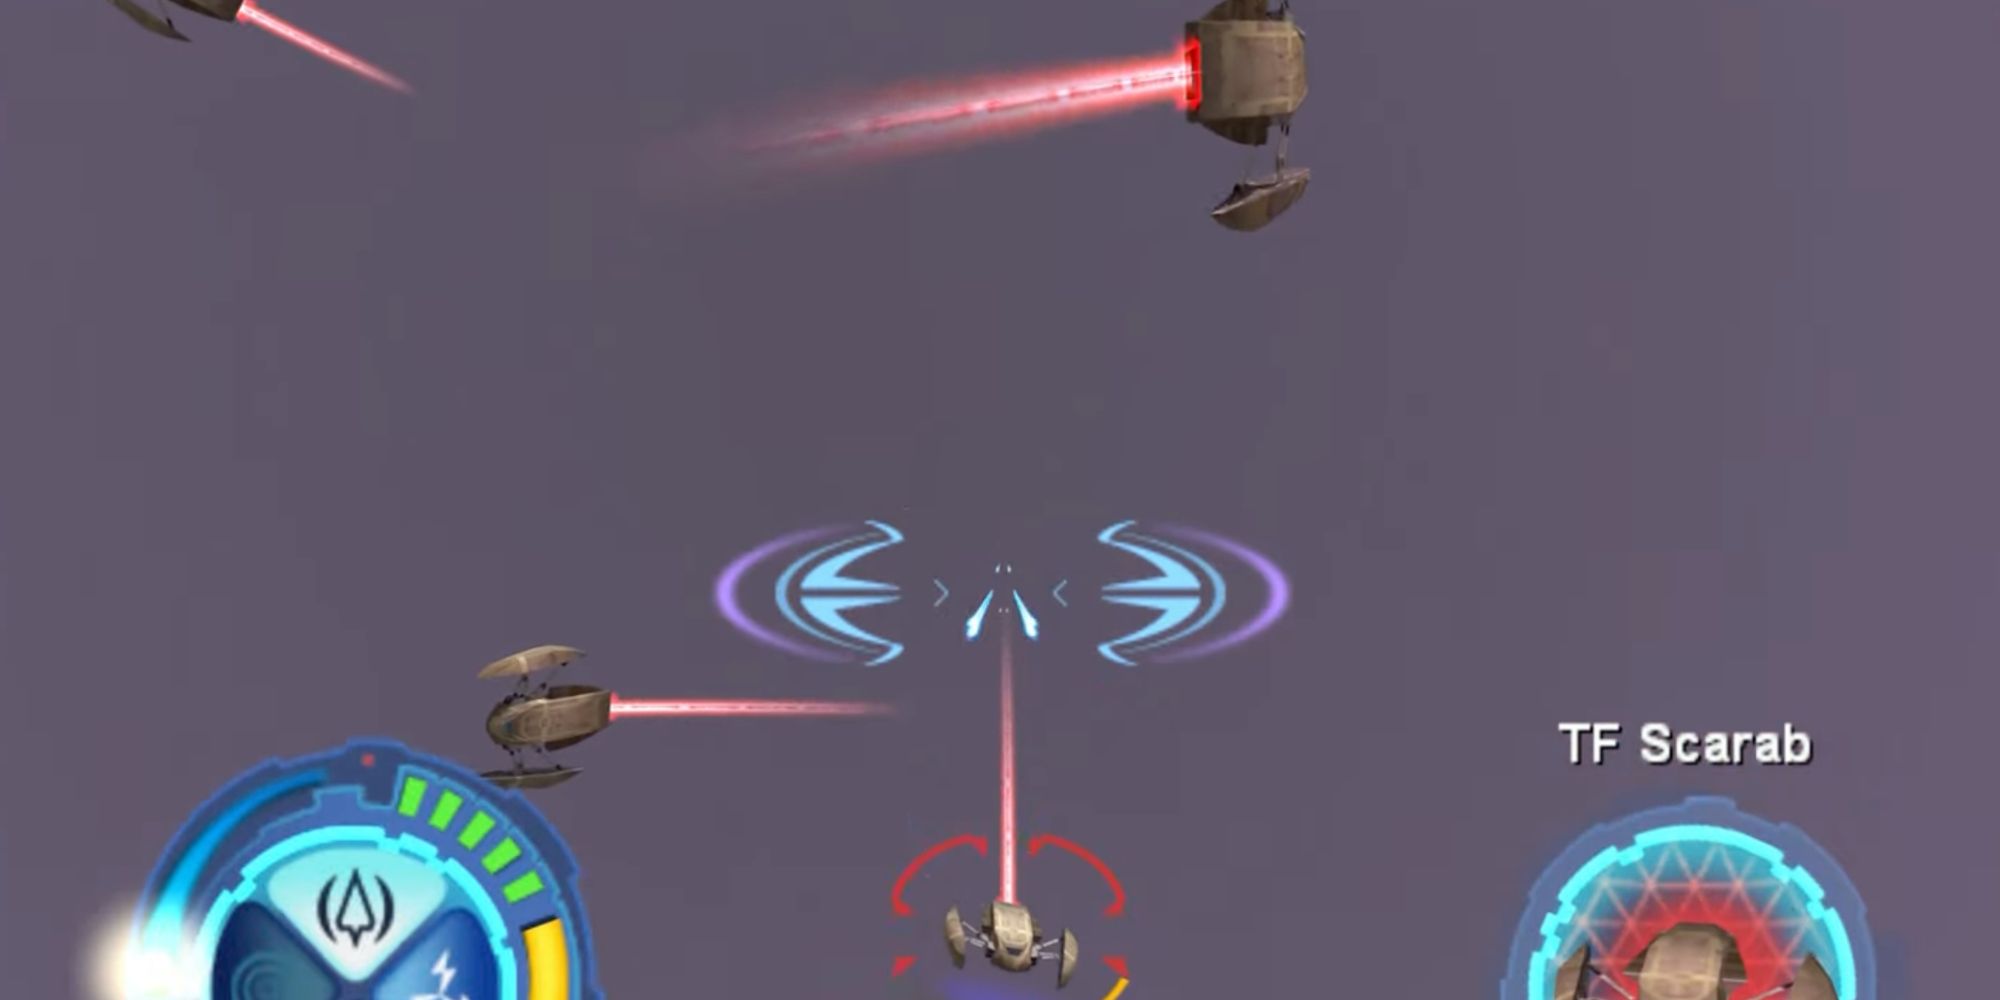 The player's ship targets an enemy in Star Wars: Jedi Starfighter